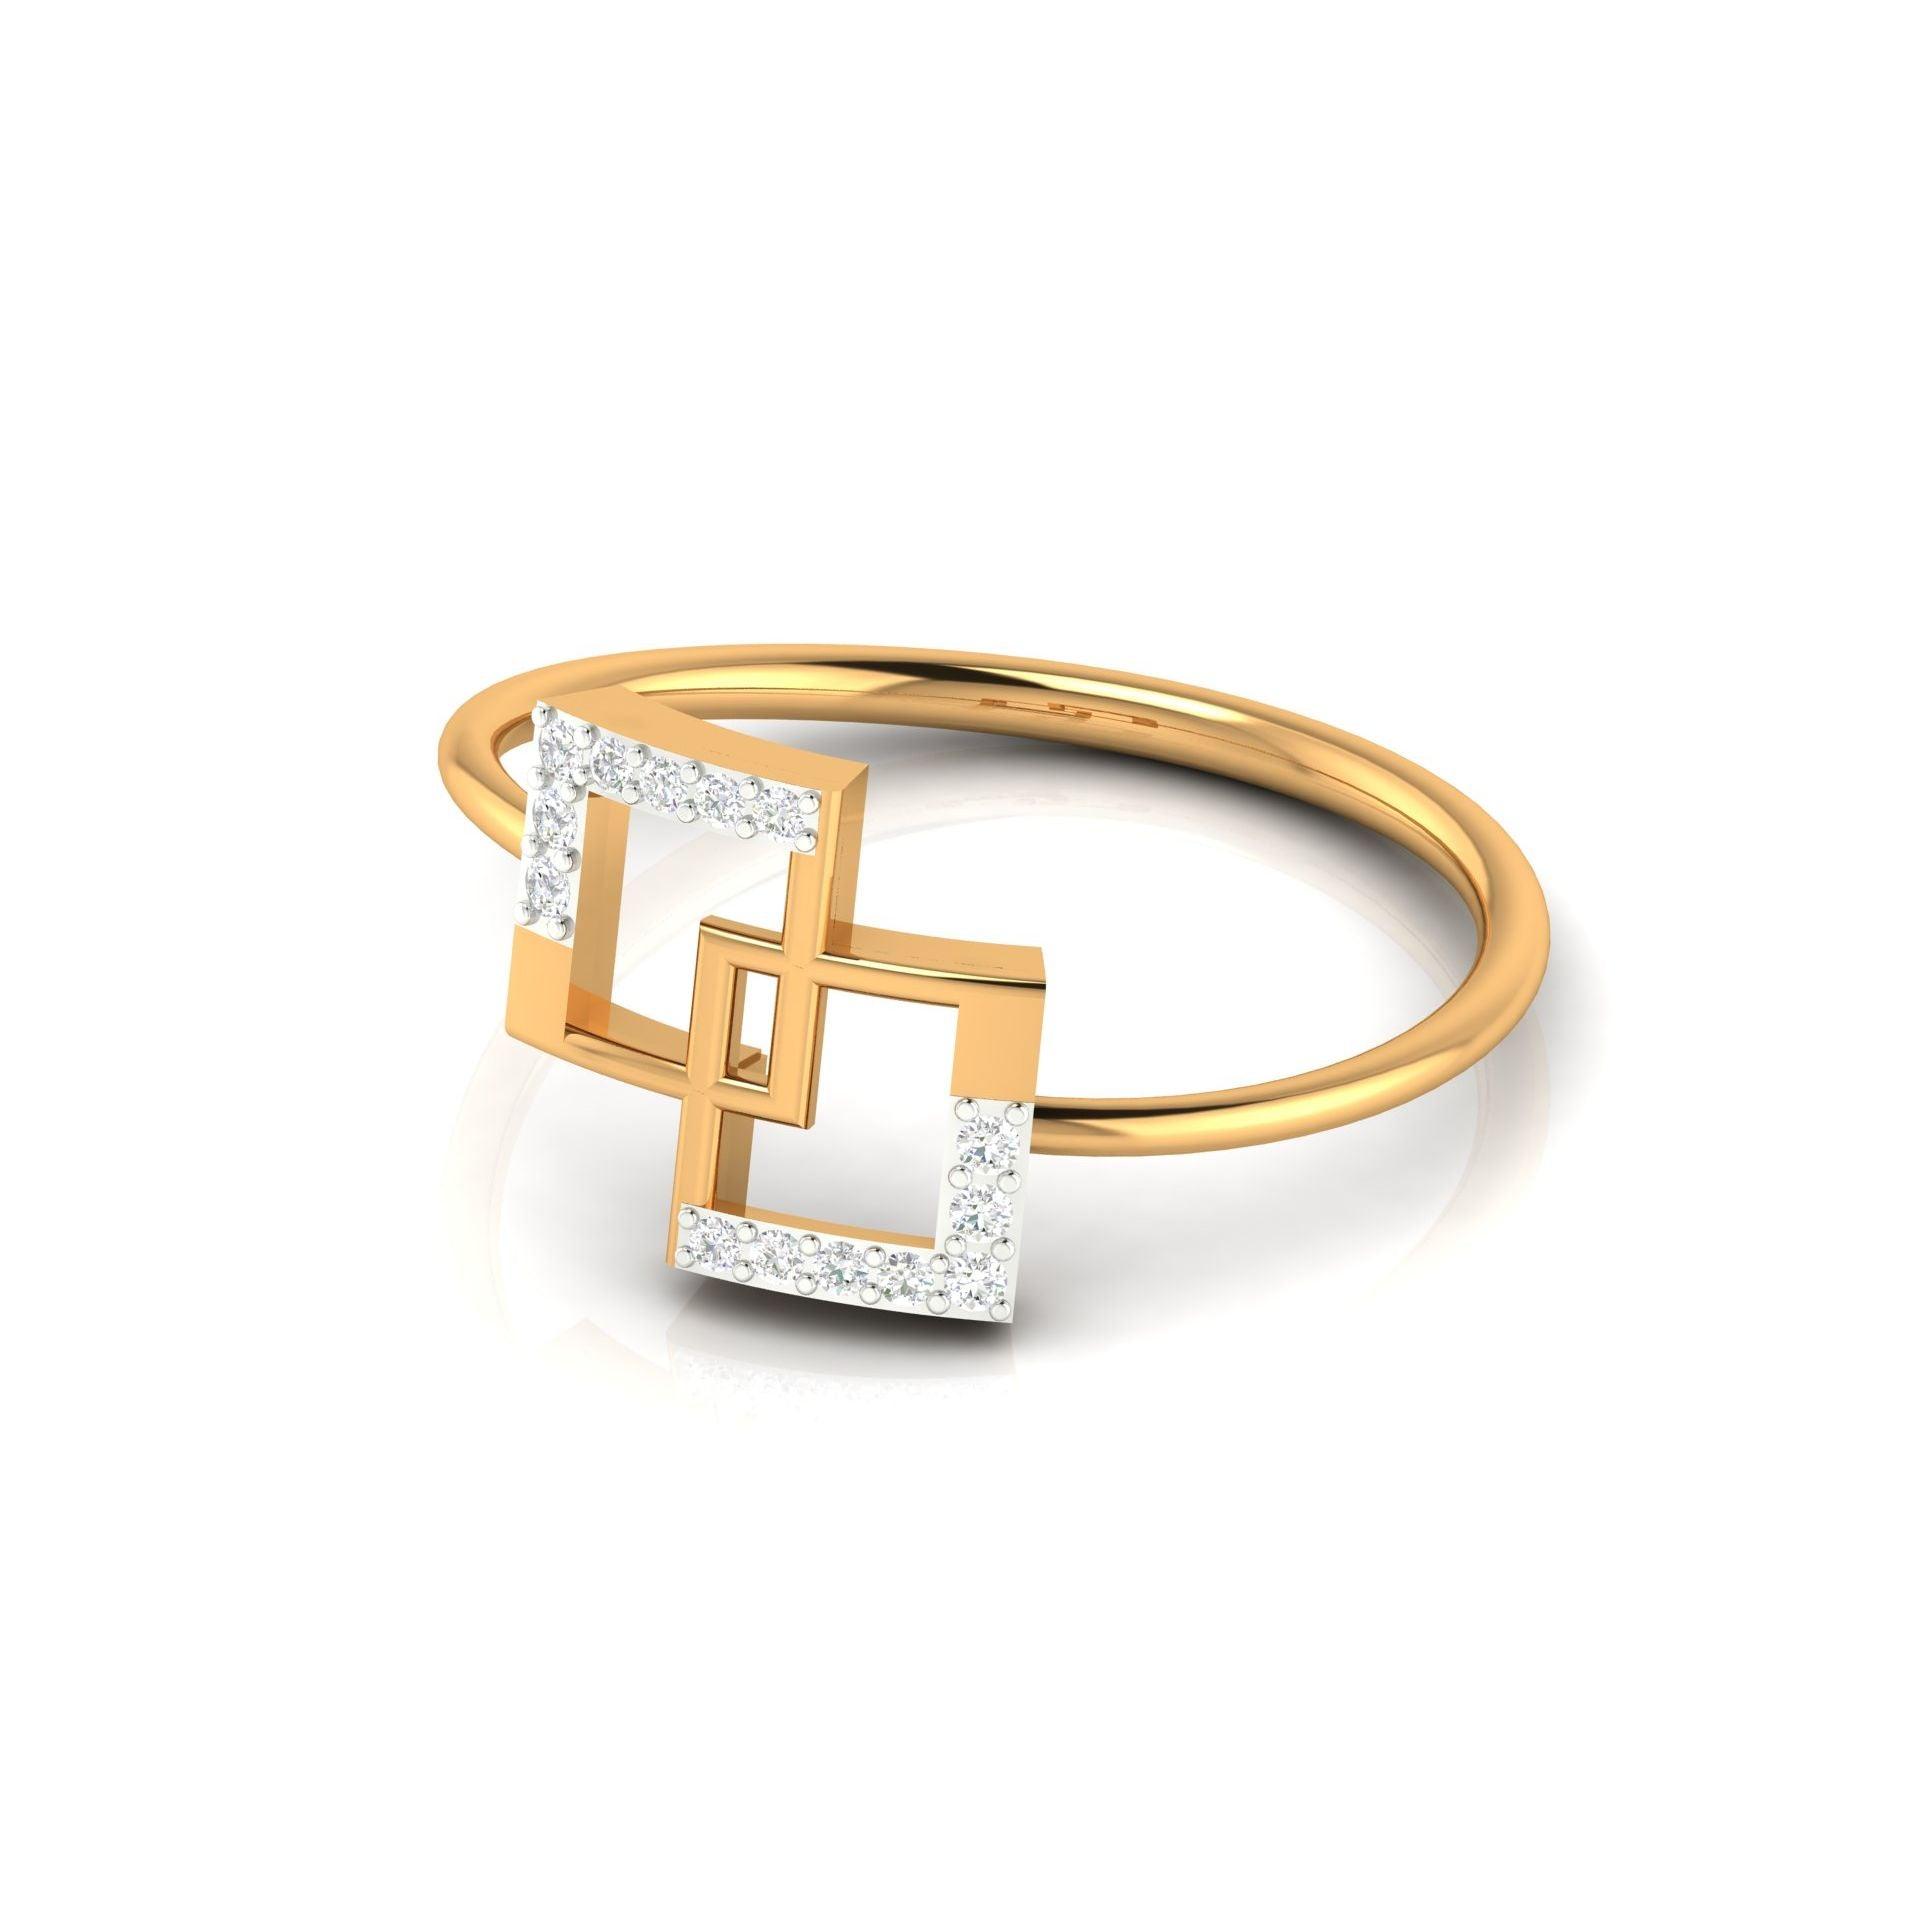 925 Stealing Silver Mystery of Stolen Rectangular Gold-Plated Ring AUS - 333 - Auory